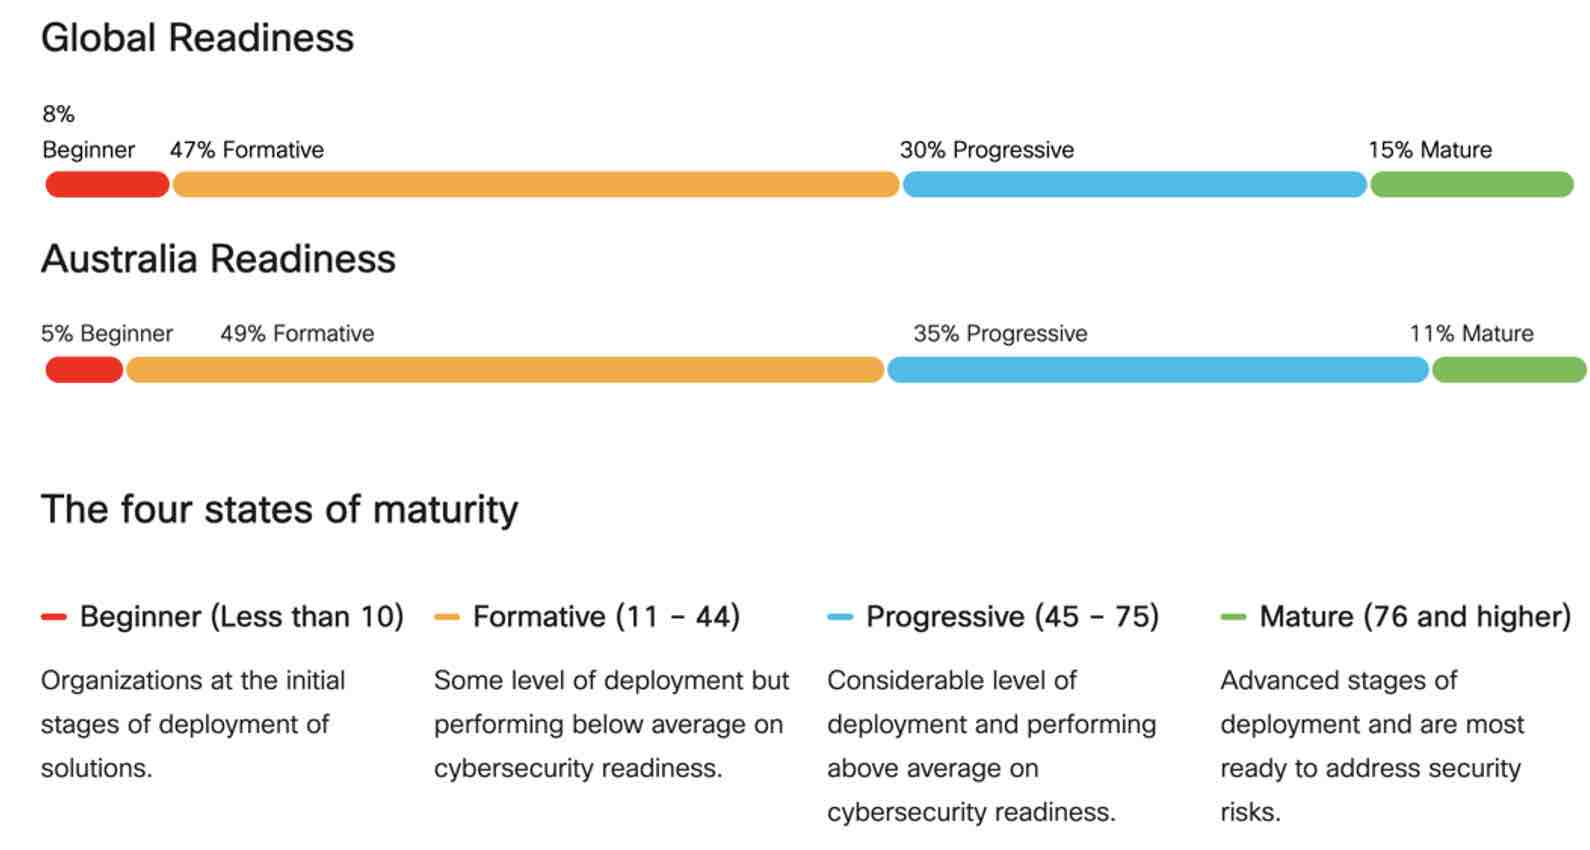 Graphic showing comparing the global cybersecurity readiness index to the Australia cybersecurity readiness index. According the the graph, the global readiness has 8% of organizations at the beginner level of maturity, 47% of organizations at the formative level of maturity, 30% of organizations at the progressive level of maturity, and 15% of organizations at the mature level of maturity. In Australia, 5% of organizations are at the beginner level of maturity, 49% of organizations are at the formative level of maturity, 35% of organizations are at the progressive level of maturity, and 11% of organizations are at the mature level of maturity.